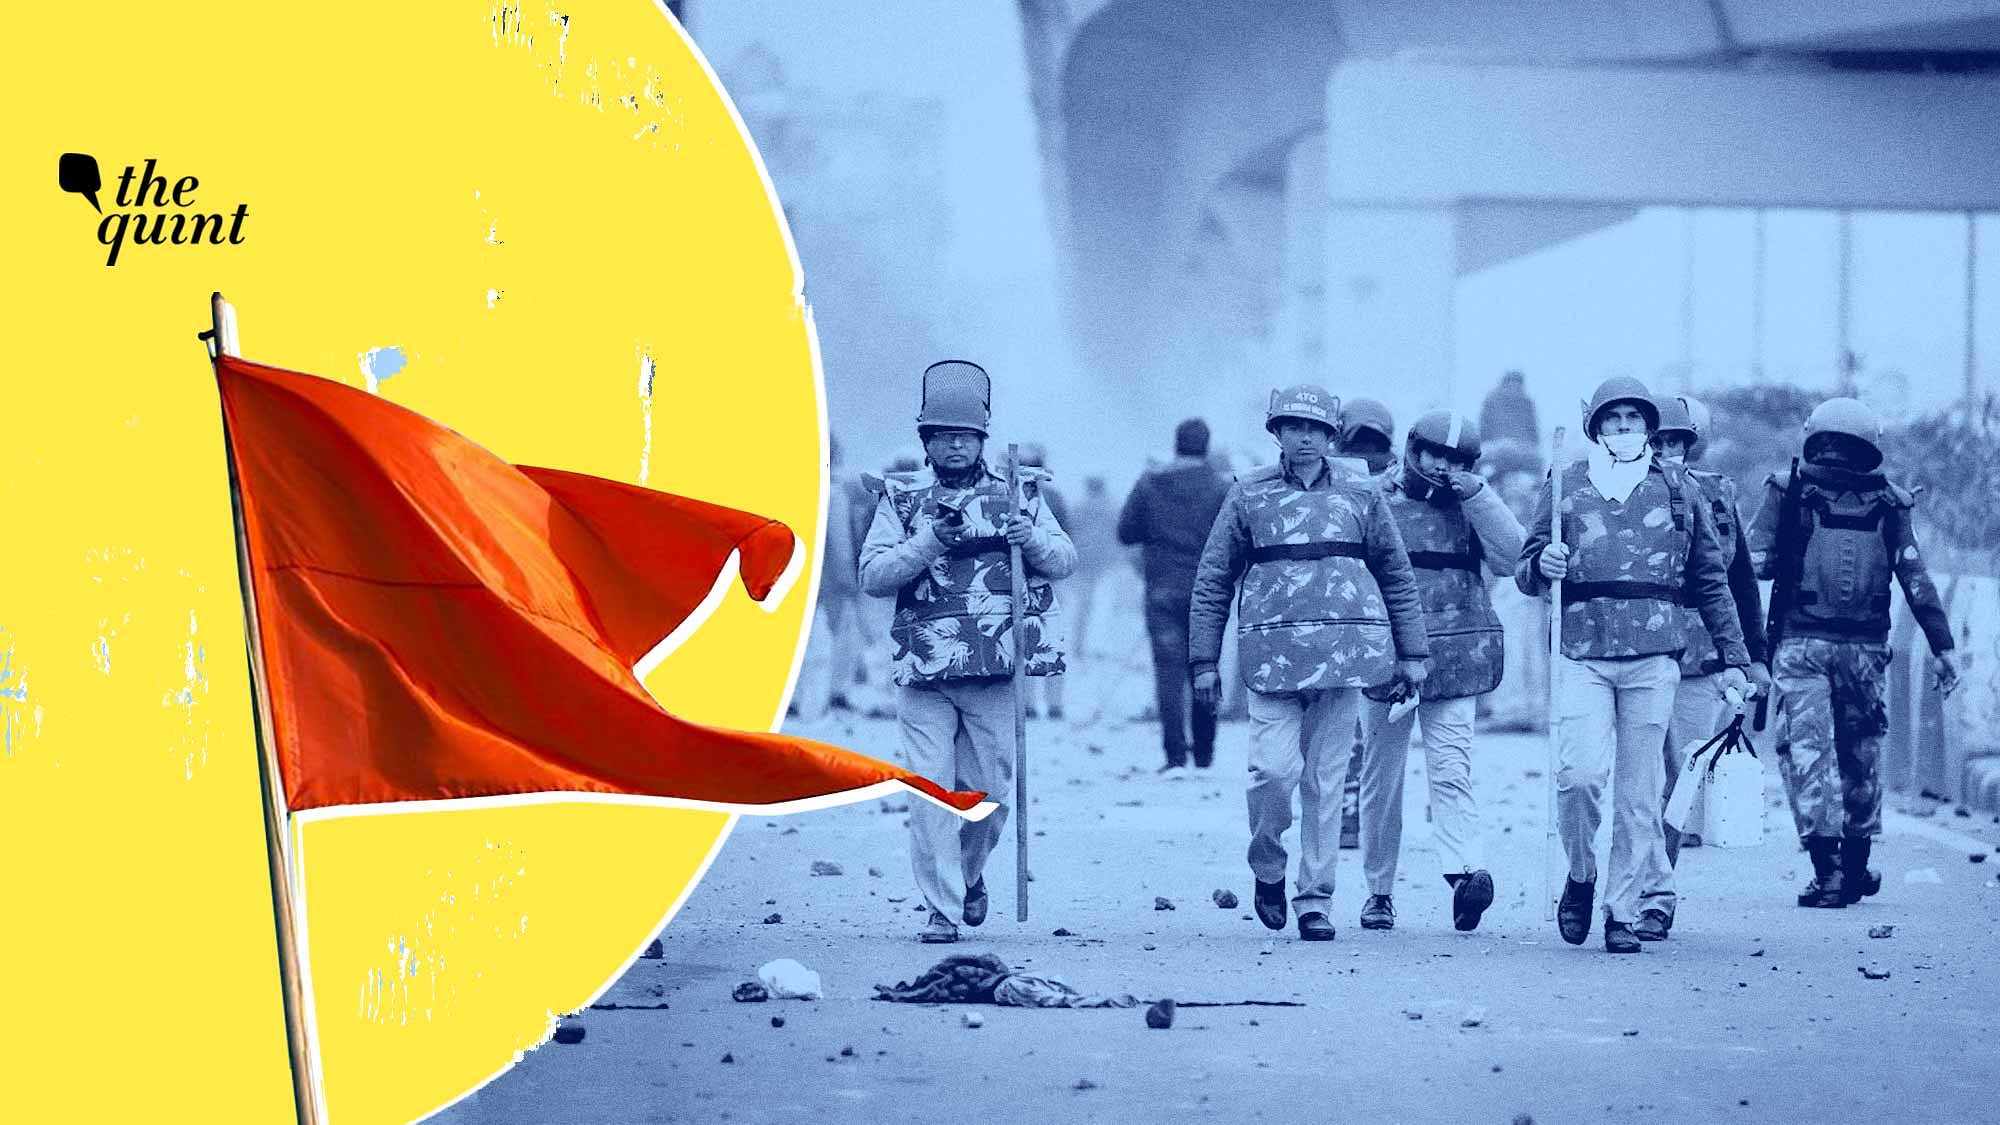 In a series of stories by The Quint on the northeast Delhi riots, we bring you evidence filed by the Delhi Police against the 16 accused from Rashriya Swayamsevak Sangh.